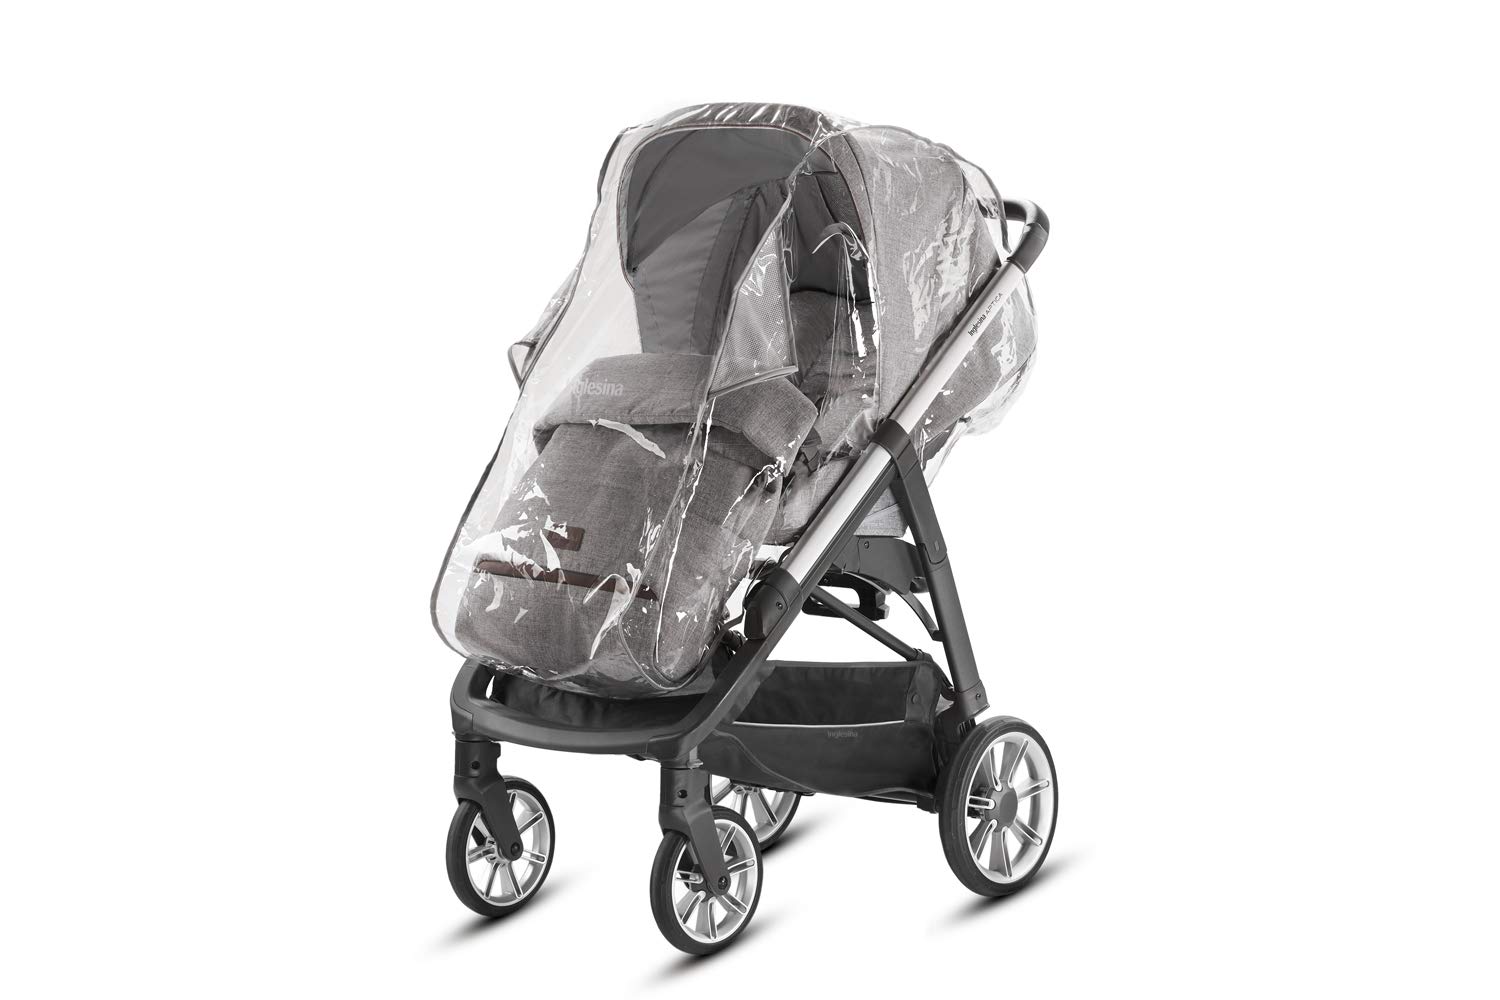 Inglesina A096KG000 Rain Cover for Pushchairs Compatible with Optica/Trilogy/Quad